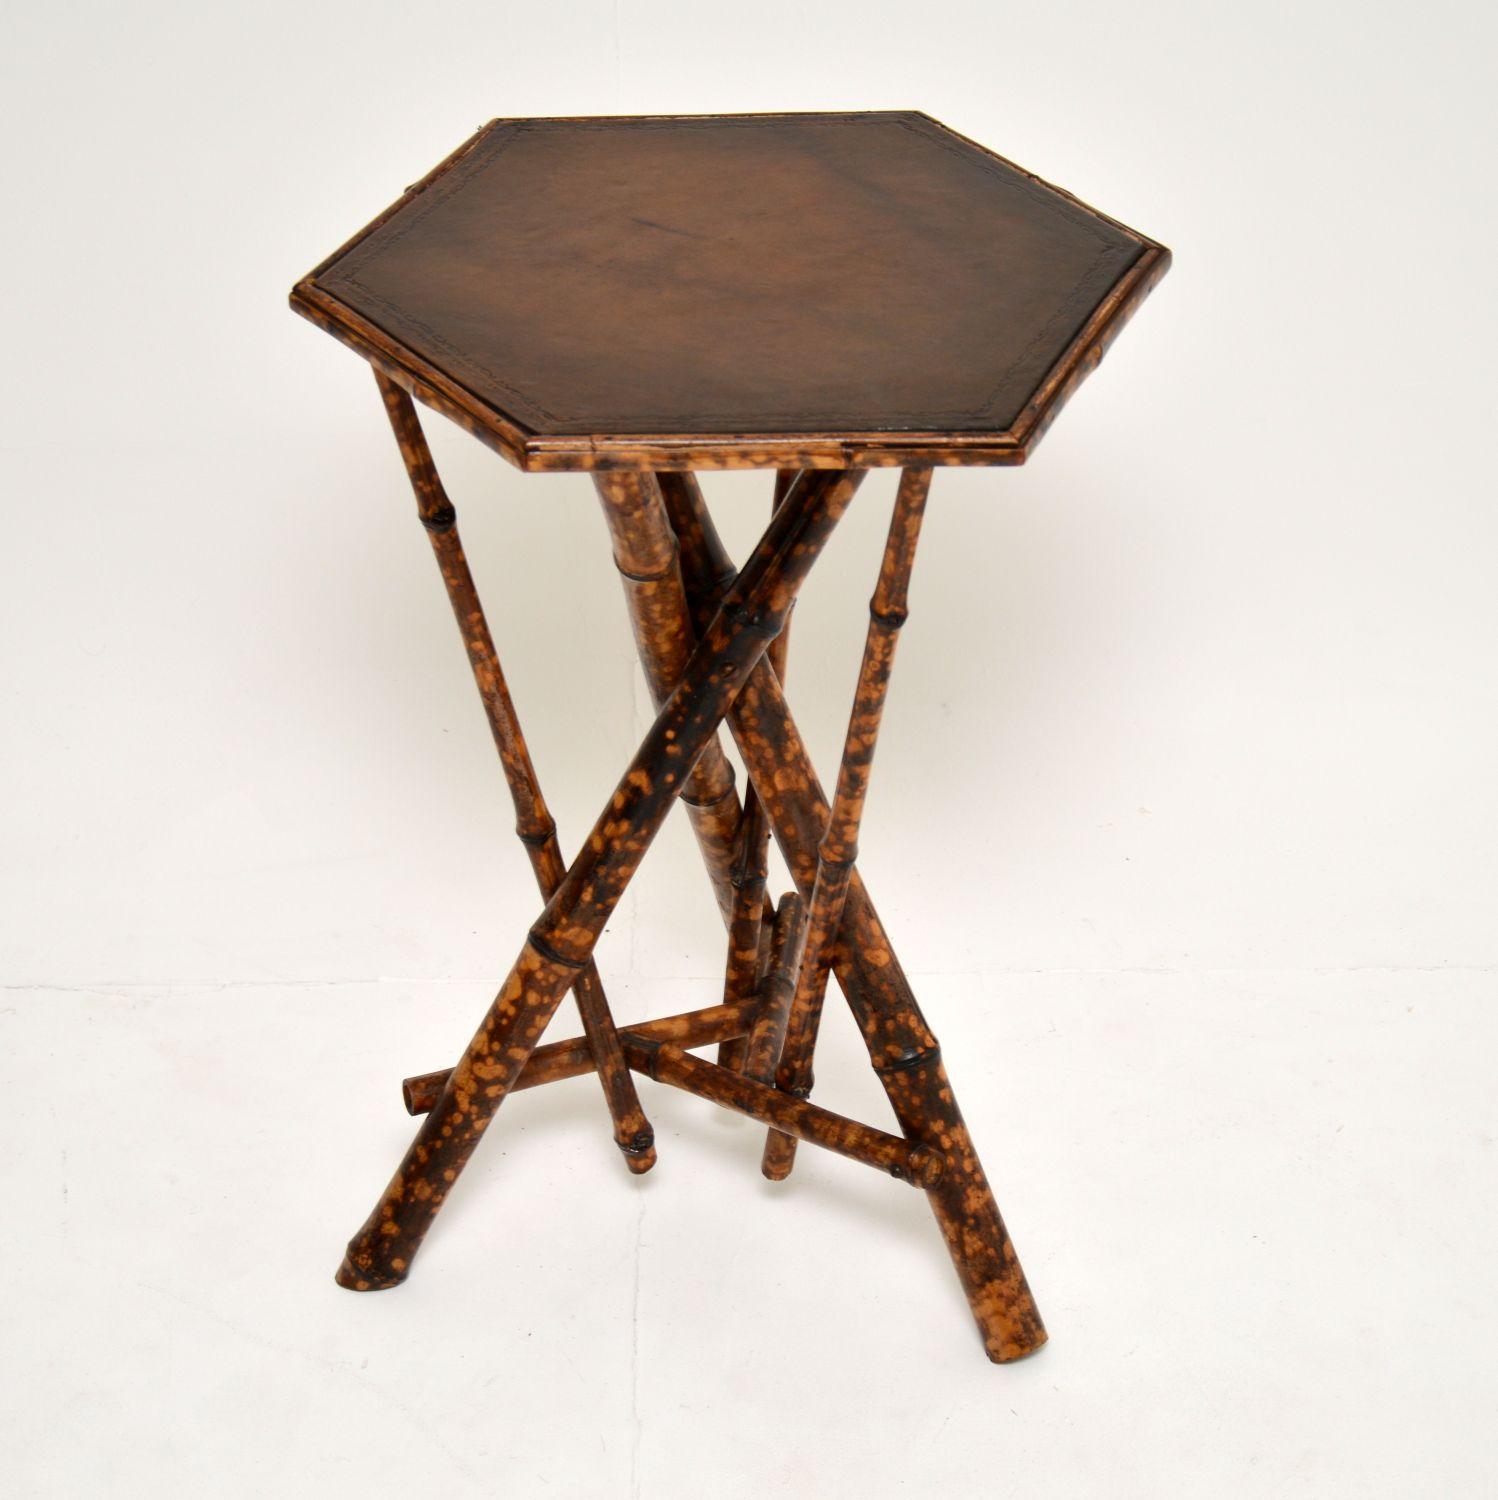 A gorgeous antique Victorian side table, made from thick bamboo and with an inset leather top. This dates from circa 1860-1880 period.

It is in amazing condition for its age, the bamboo base has been newly polished. The inset leather top has also